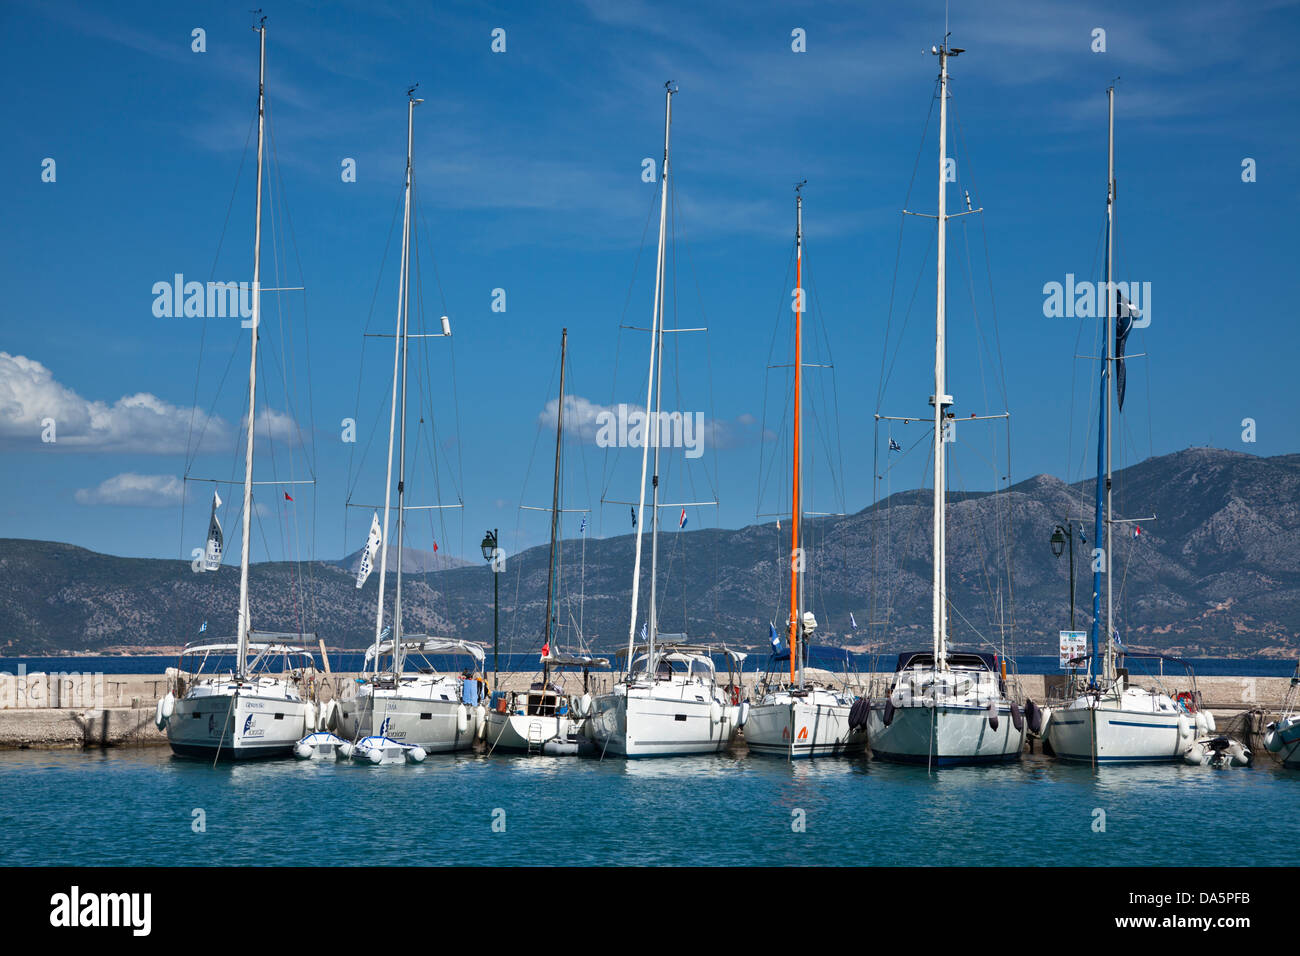 Yachts moored in the harbour at Kalamos, Greece Stock Photo